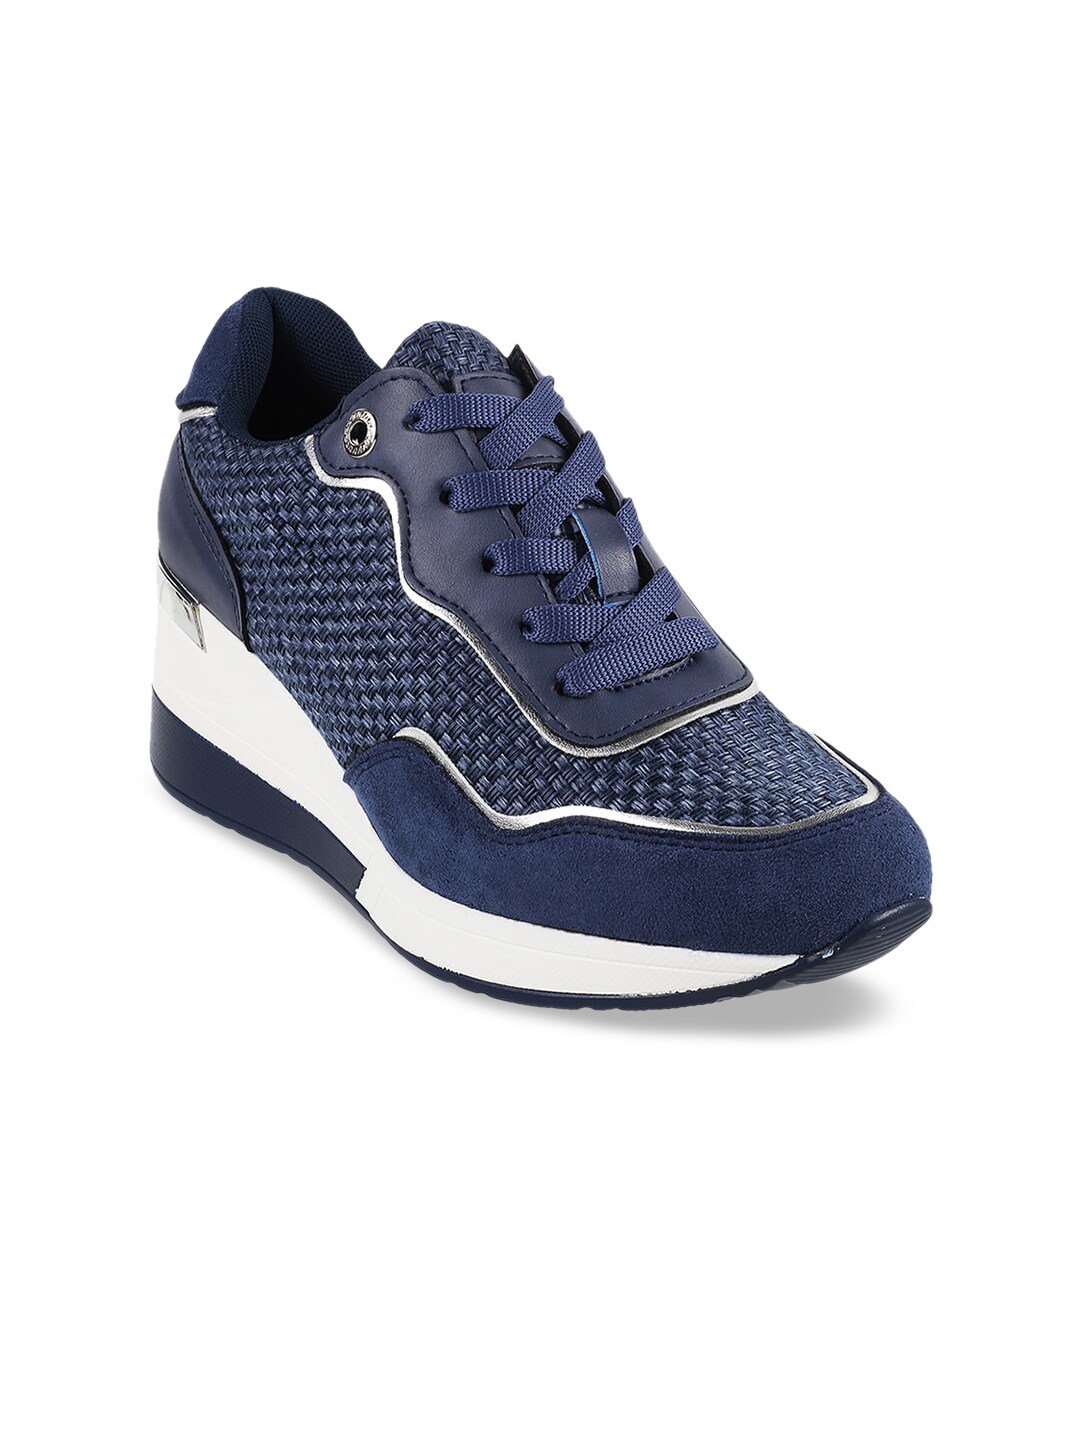 Mochi Women Blue Textured Sneakers Price in India